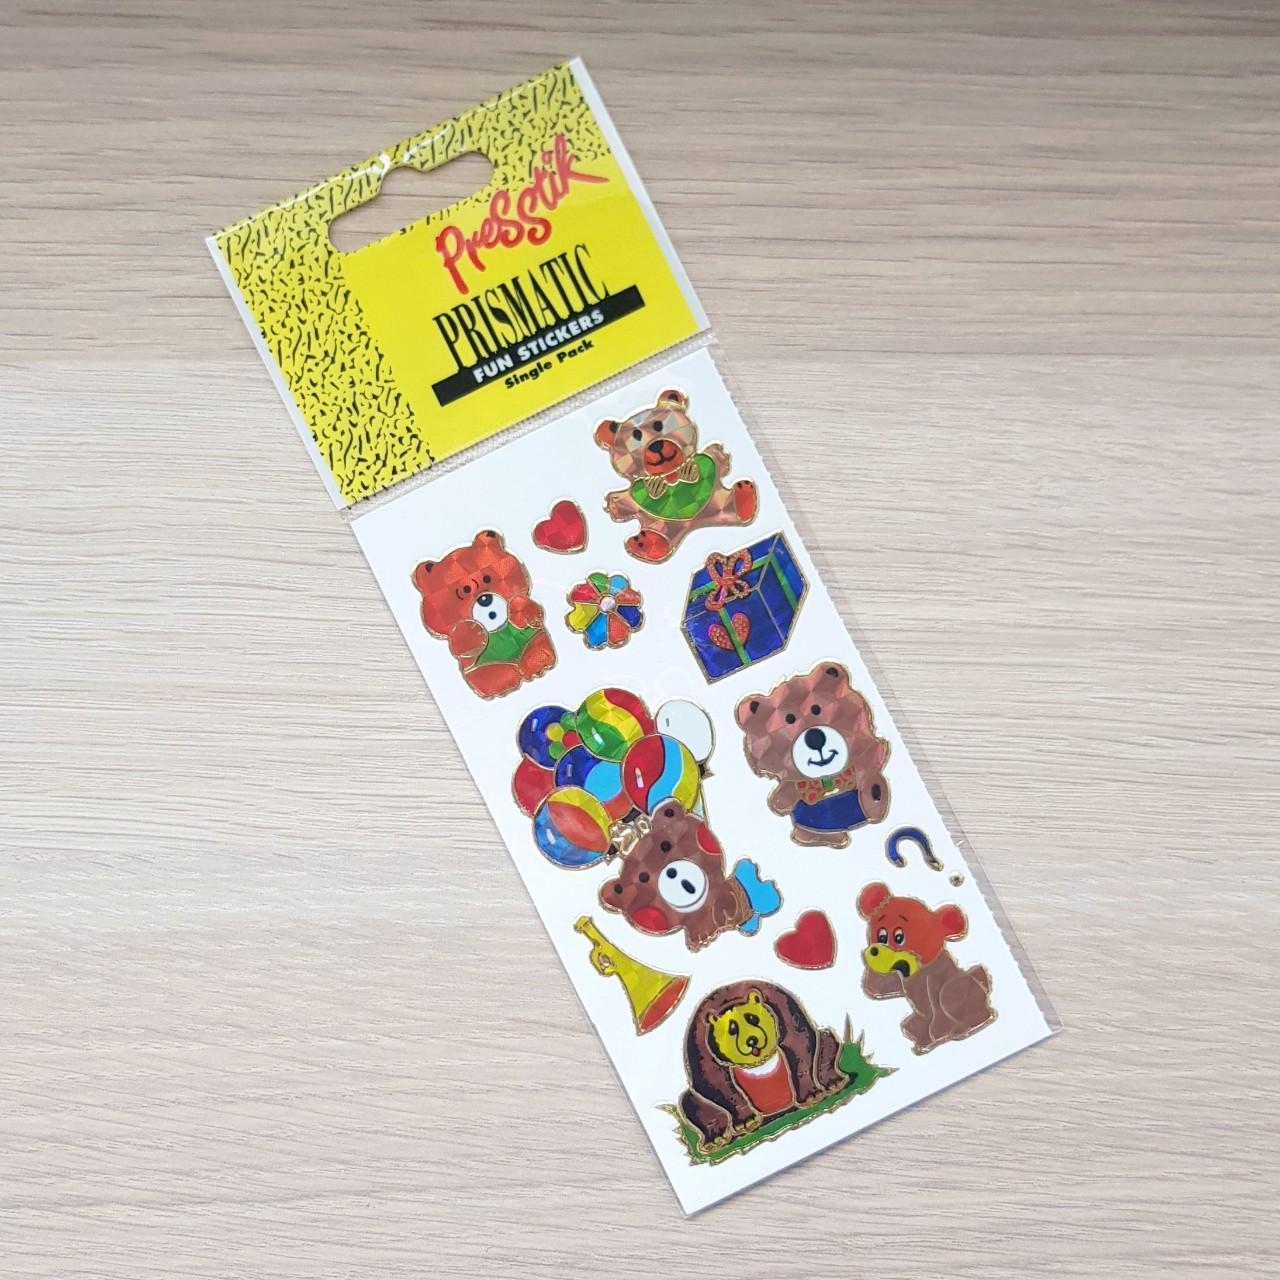 1 sheet Prismatic Bear Stickers Shiny stickers with - Depop